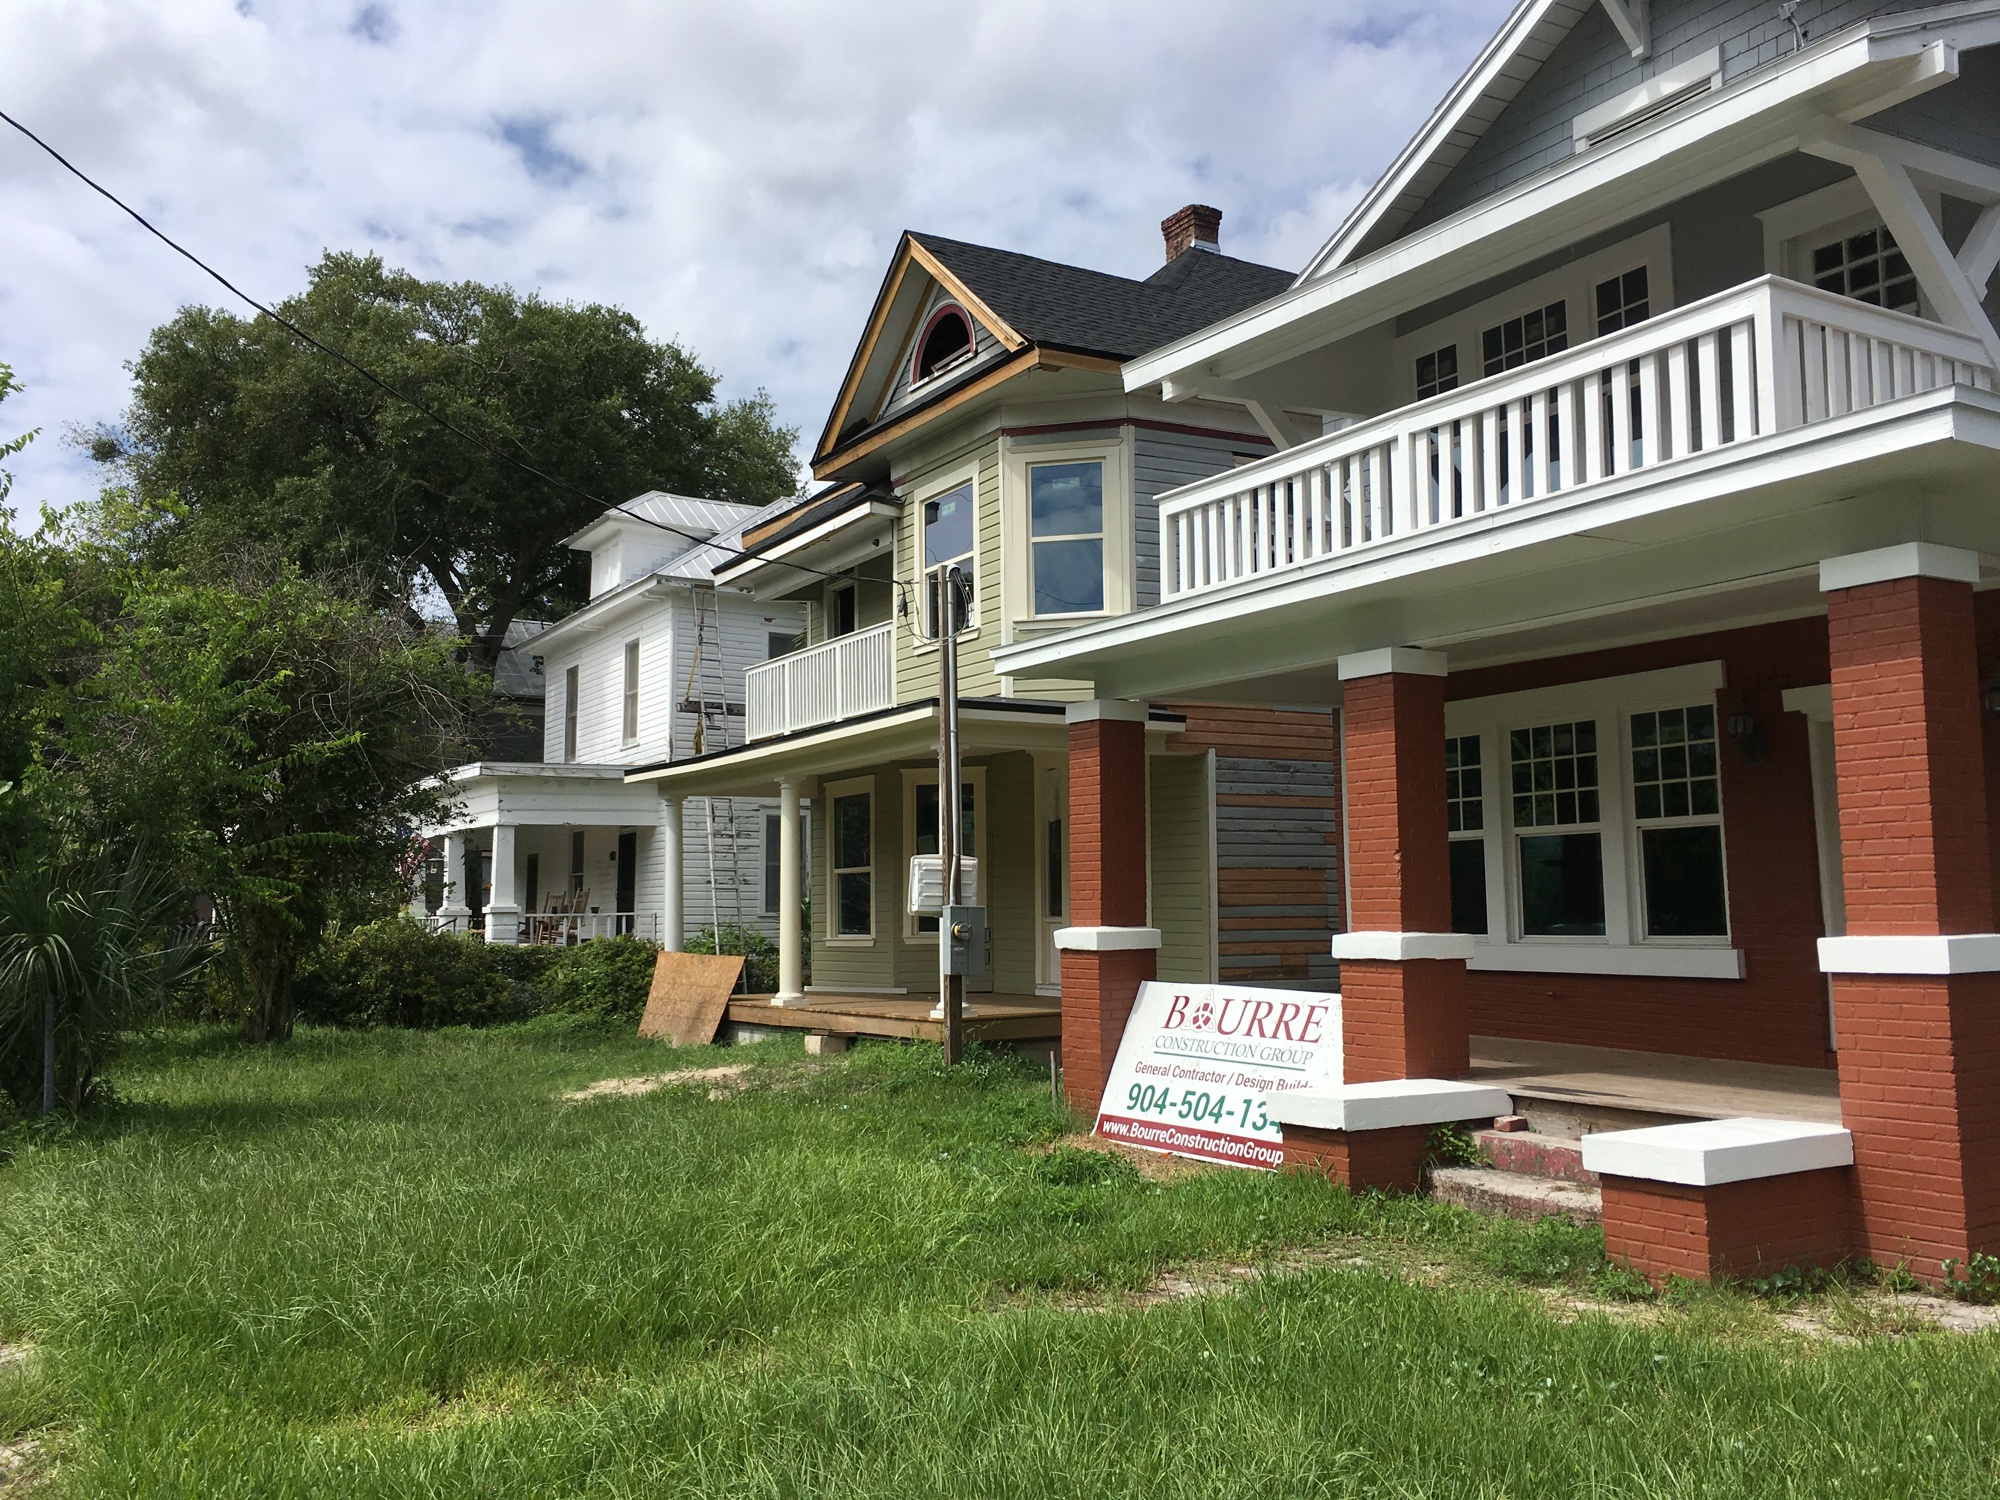 Two Springfield home renovations nearing completion on Walnut Street, south of East Sixth Street.